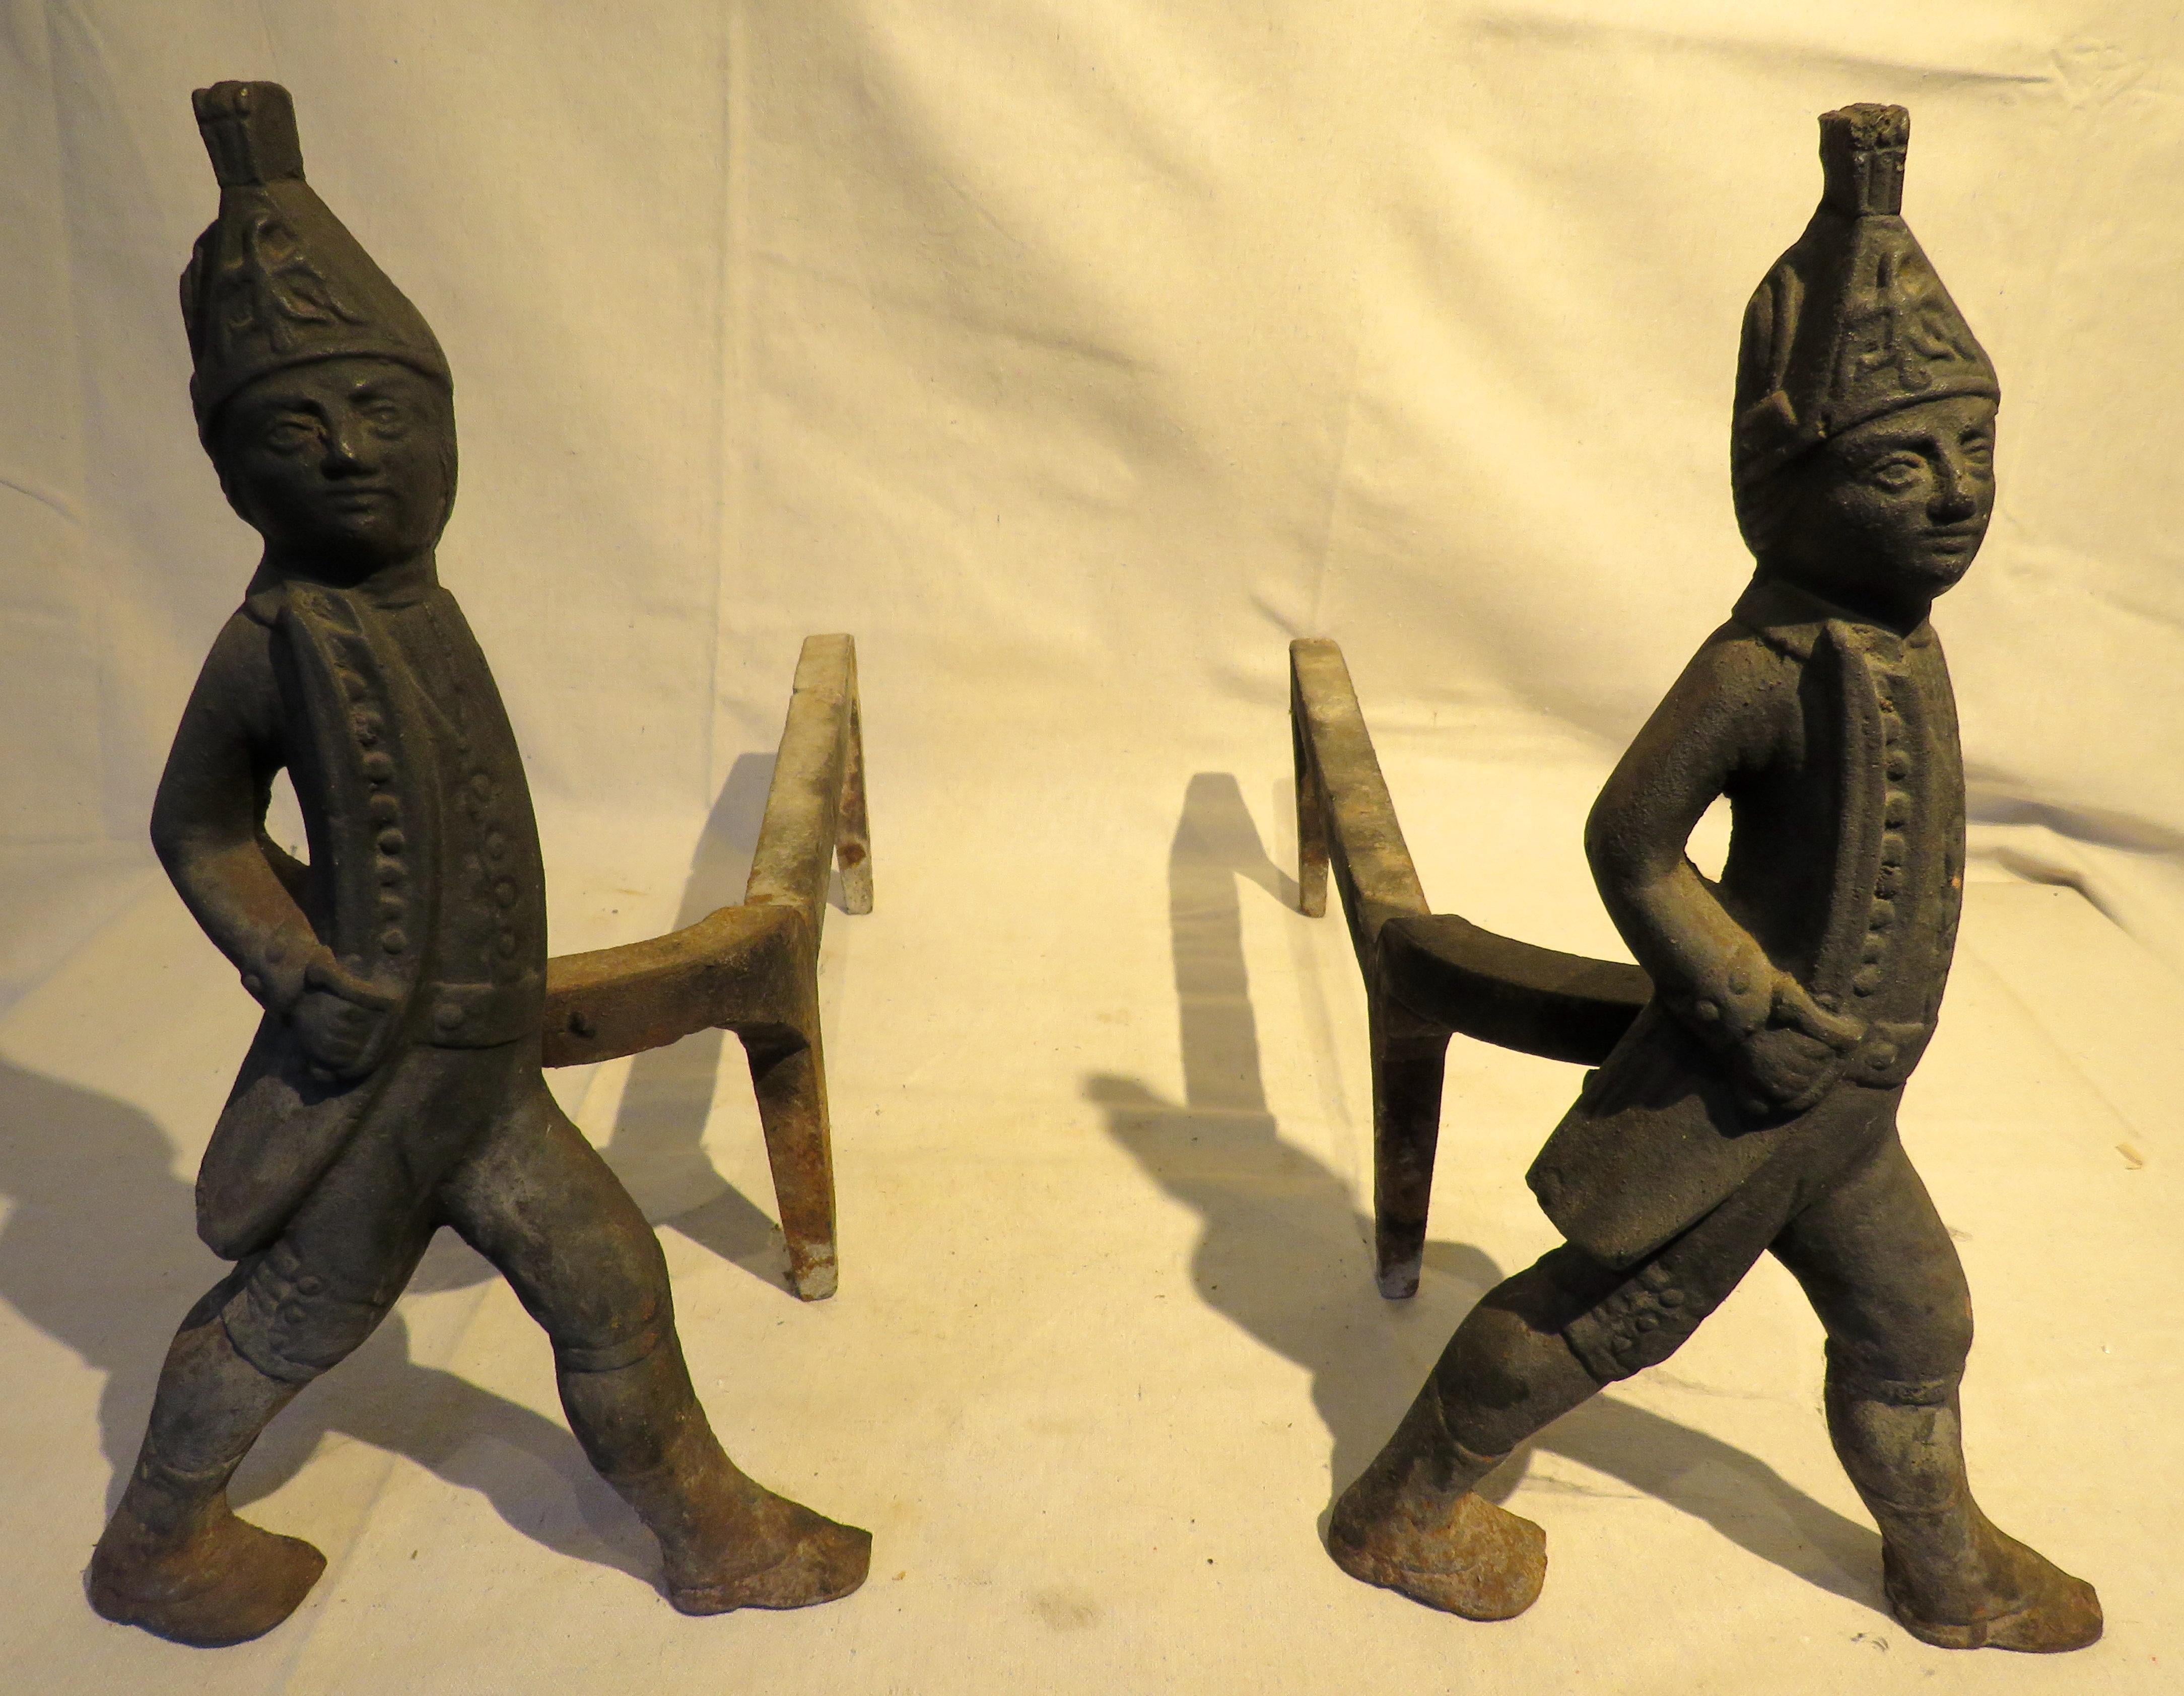 Matched pair of cast iron Hessian Fireplace Andirons. Each depicting a marching soldier in uniform, standing in semi-profile, gripping a sword. Thought to have been inspired by the strong dislike of the mercenaries brought to the country by the